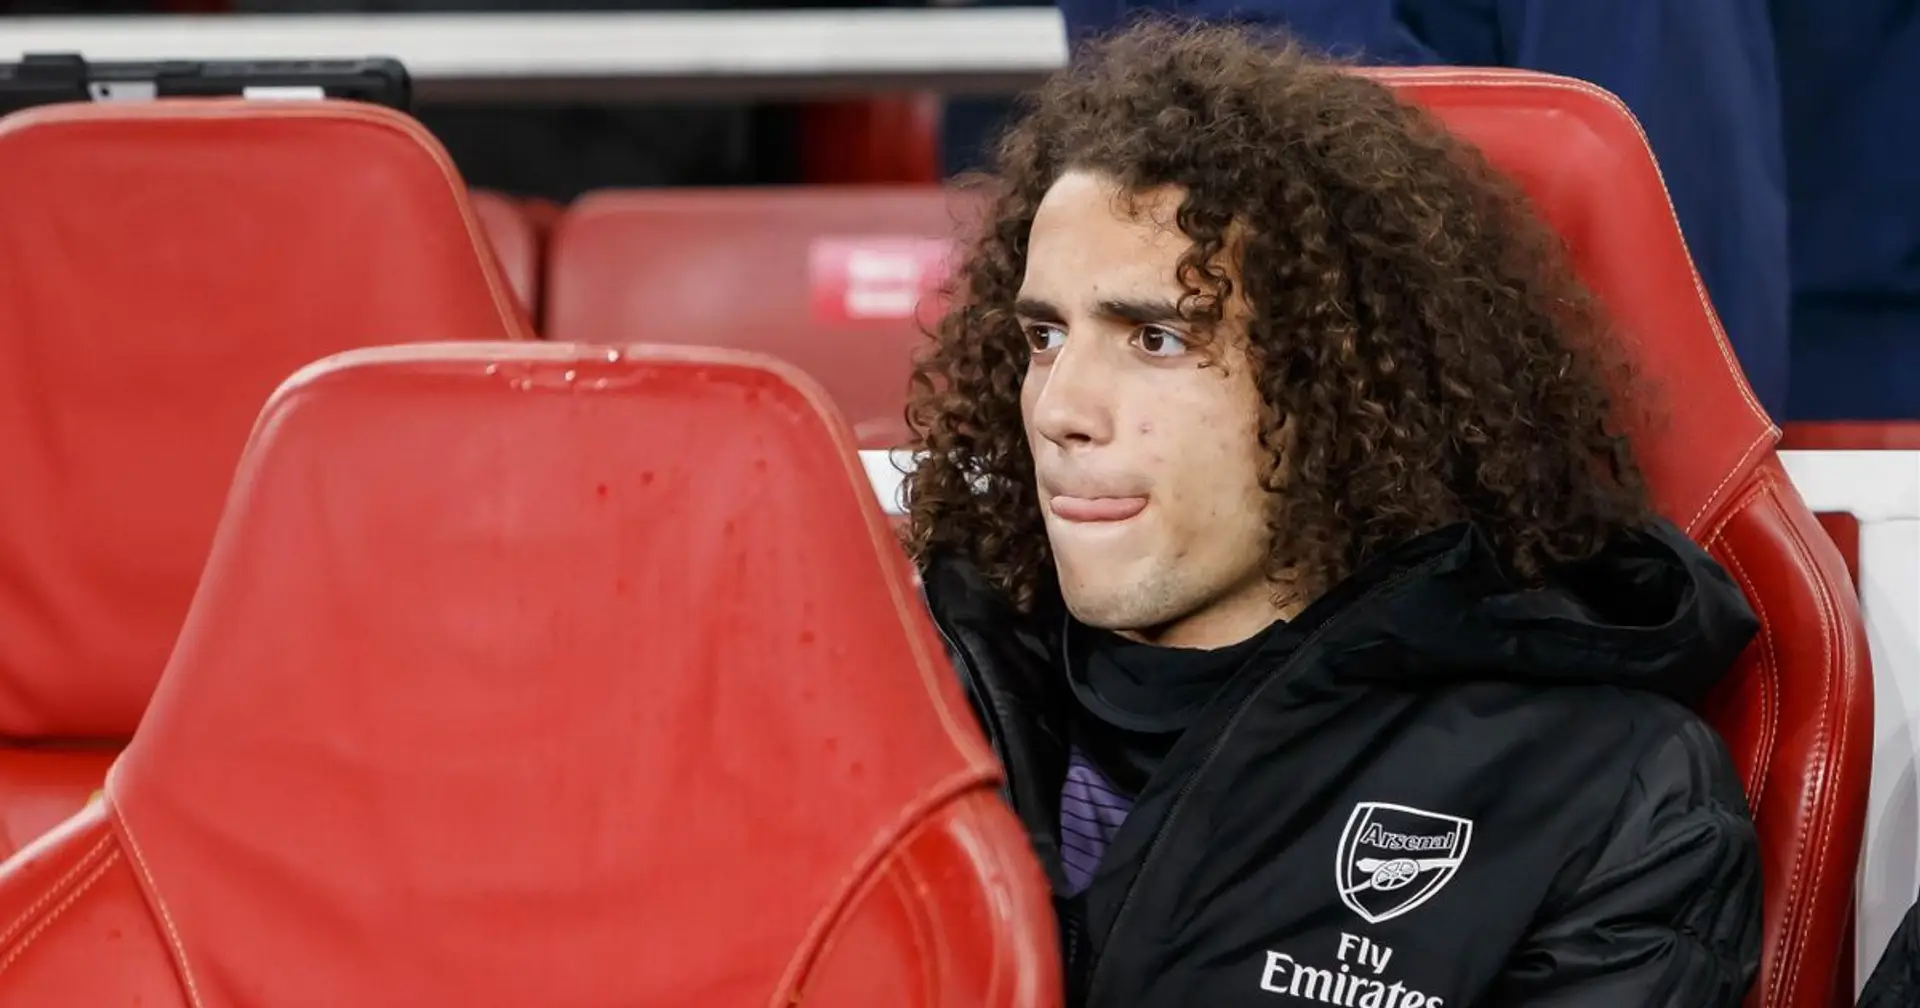 Telefoot: Marseille make contact with Arsenal over possible Guendouzi loan (reliability: 4 stars)